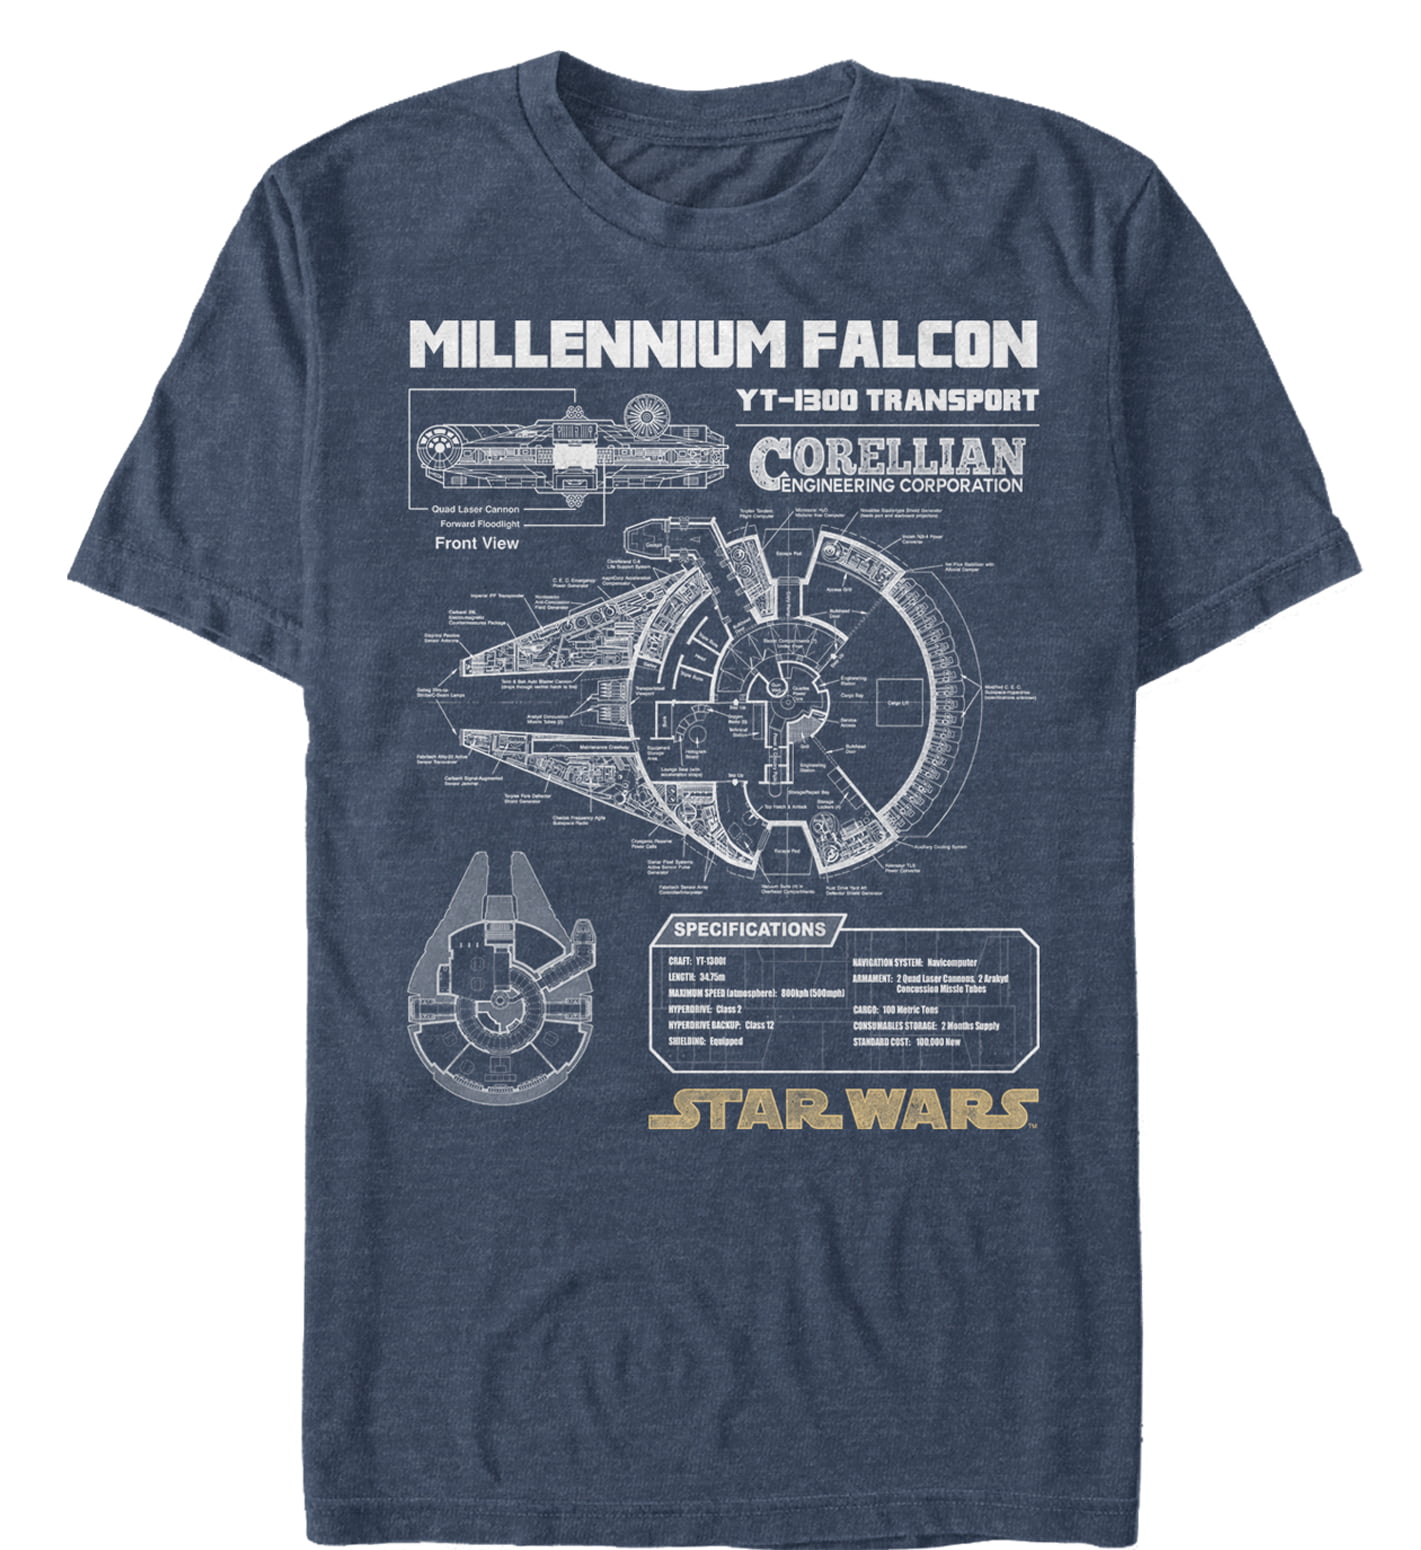 Millennium Falcon The Fastest Hunk Of Junk In The Galaxy Adult T Shirt